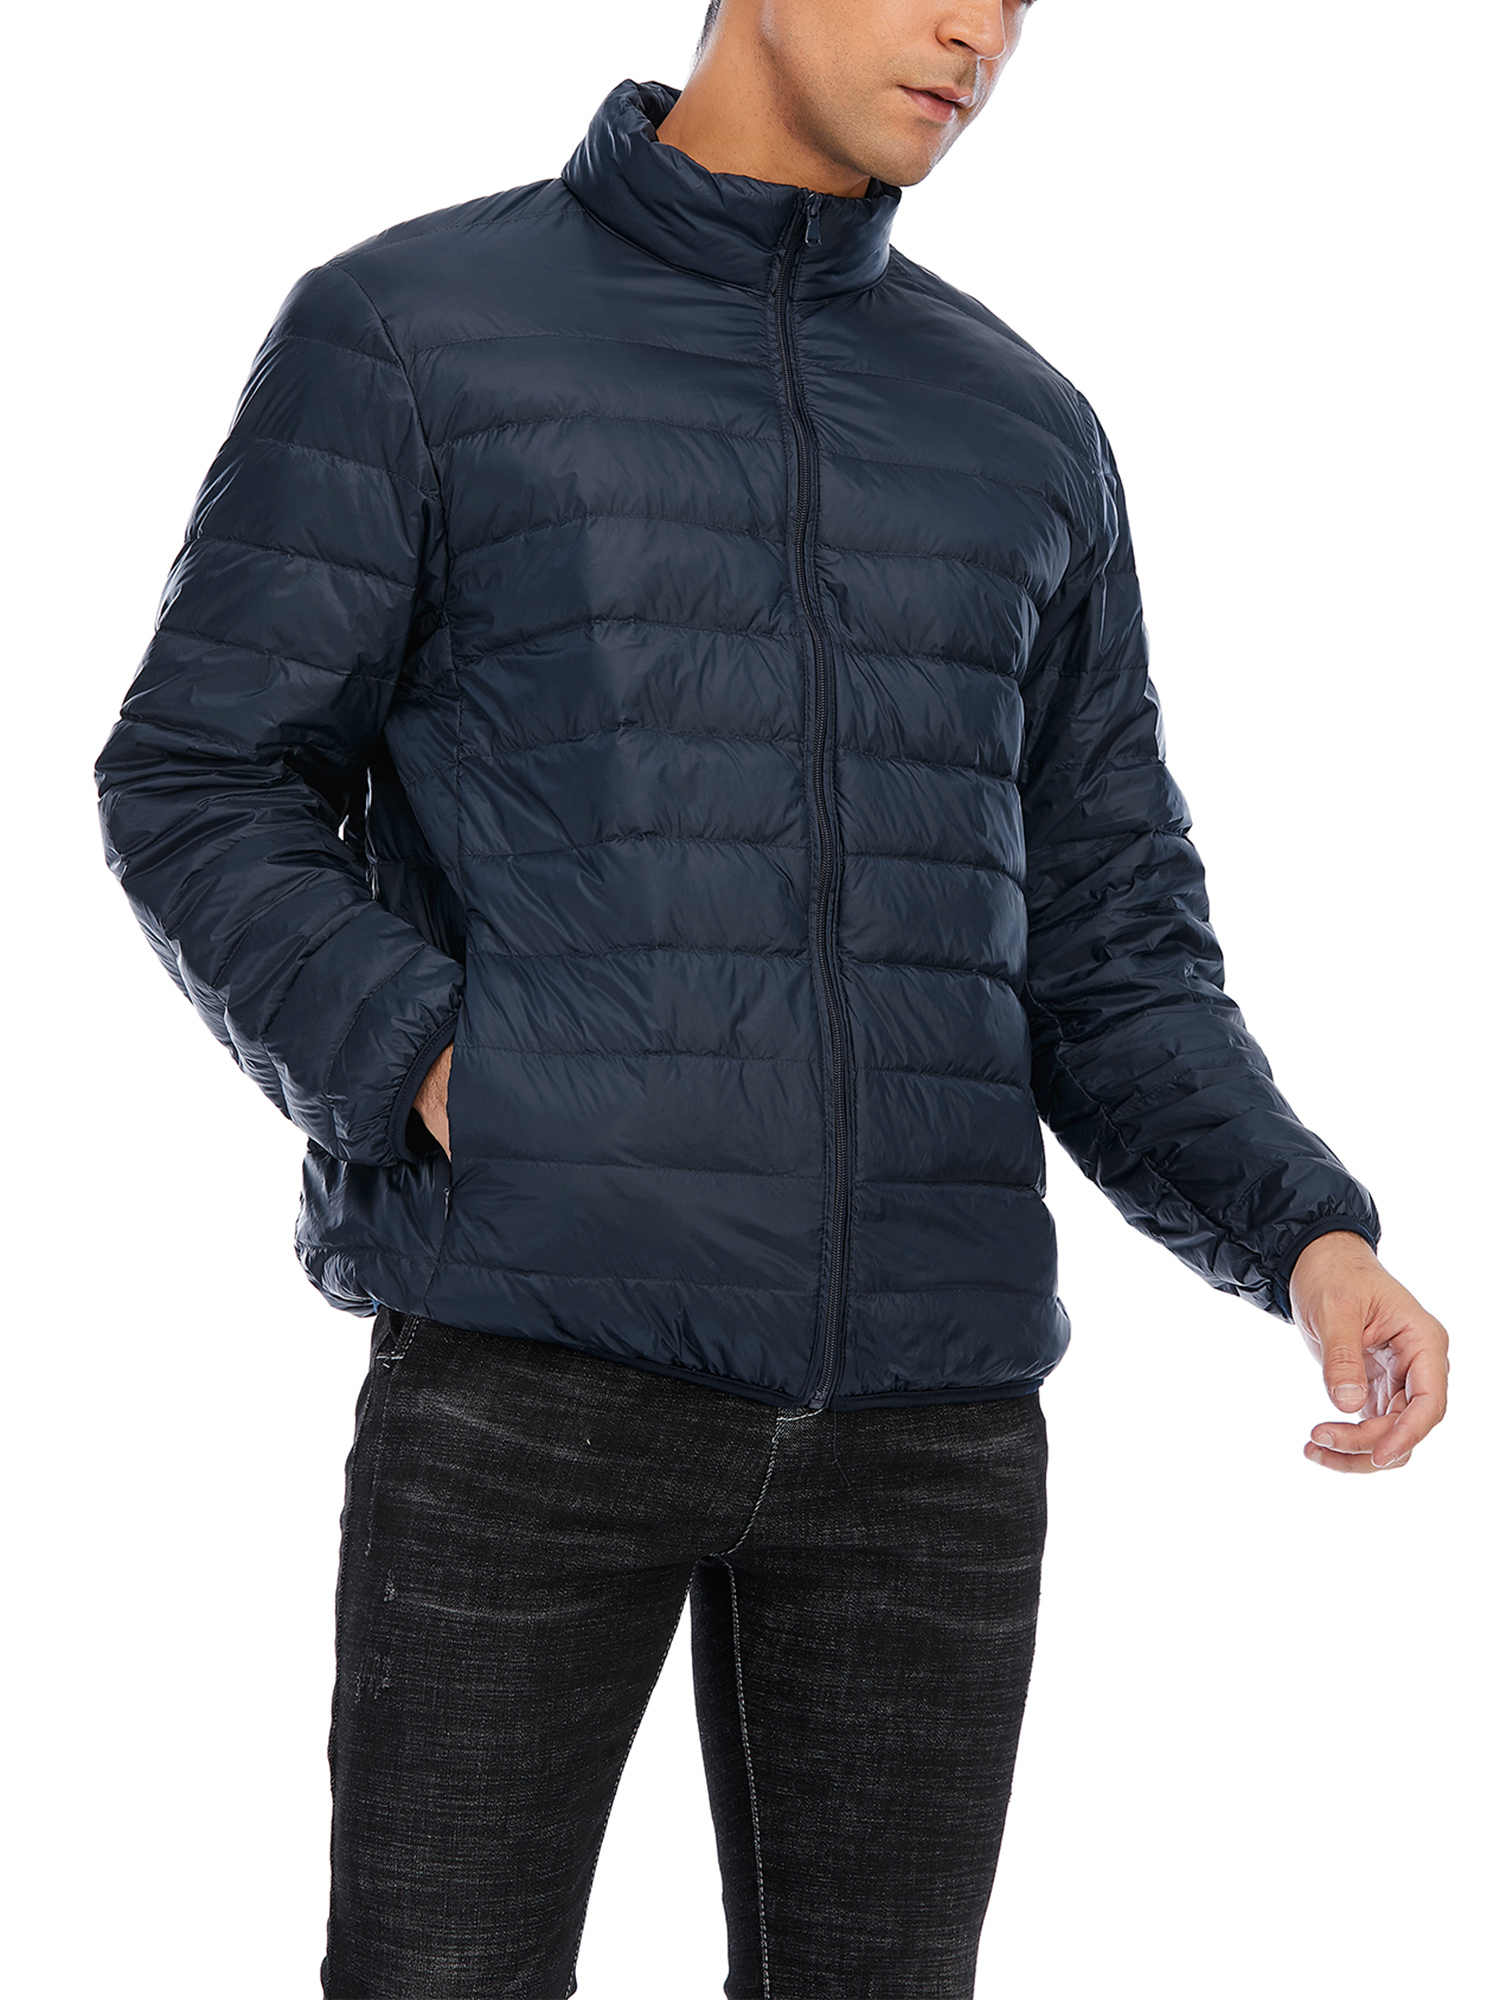 SAYFUT Men's Lightweight Down Jacket Puffer Bubble Coat Packable Warm Puffer Down Zipper Coat Water Resistant  Big and Tall Size S-2XL - image 2 of 8